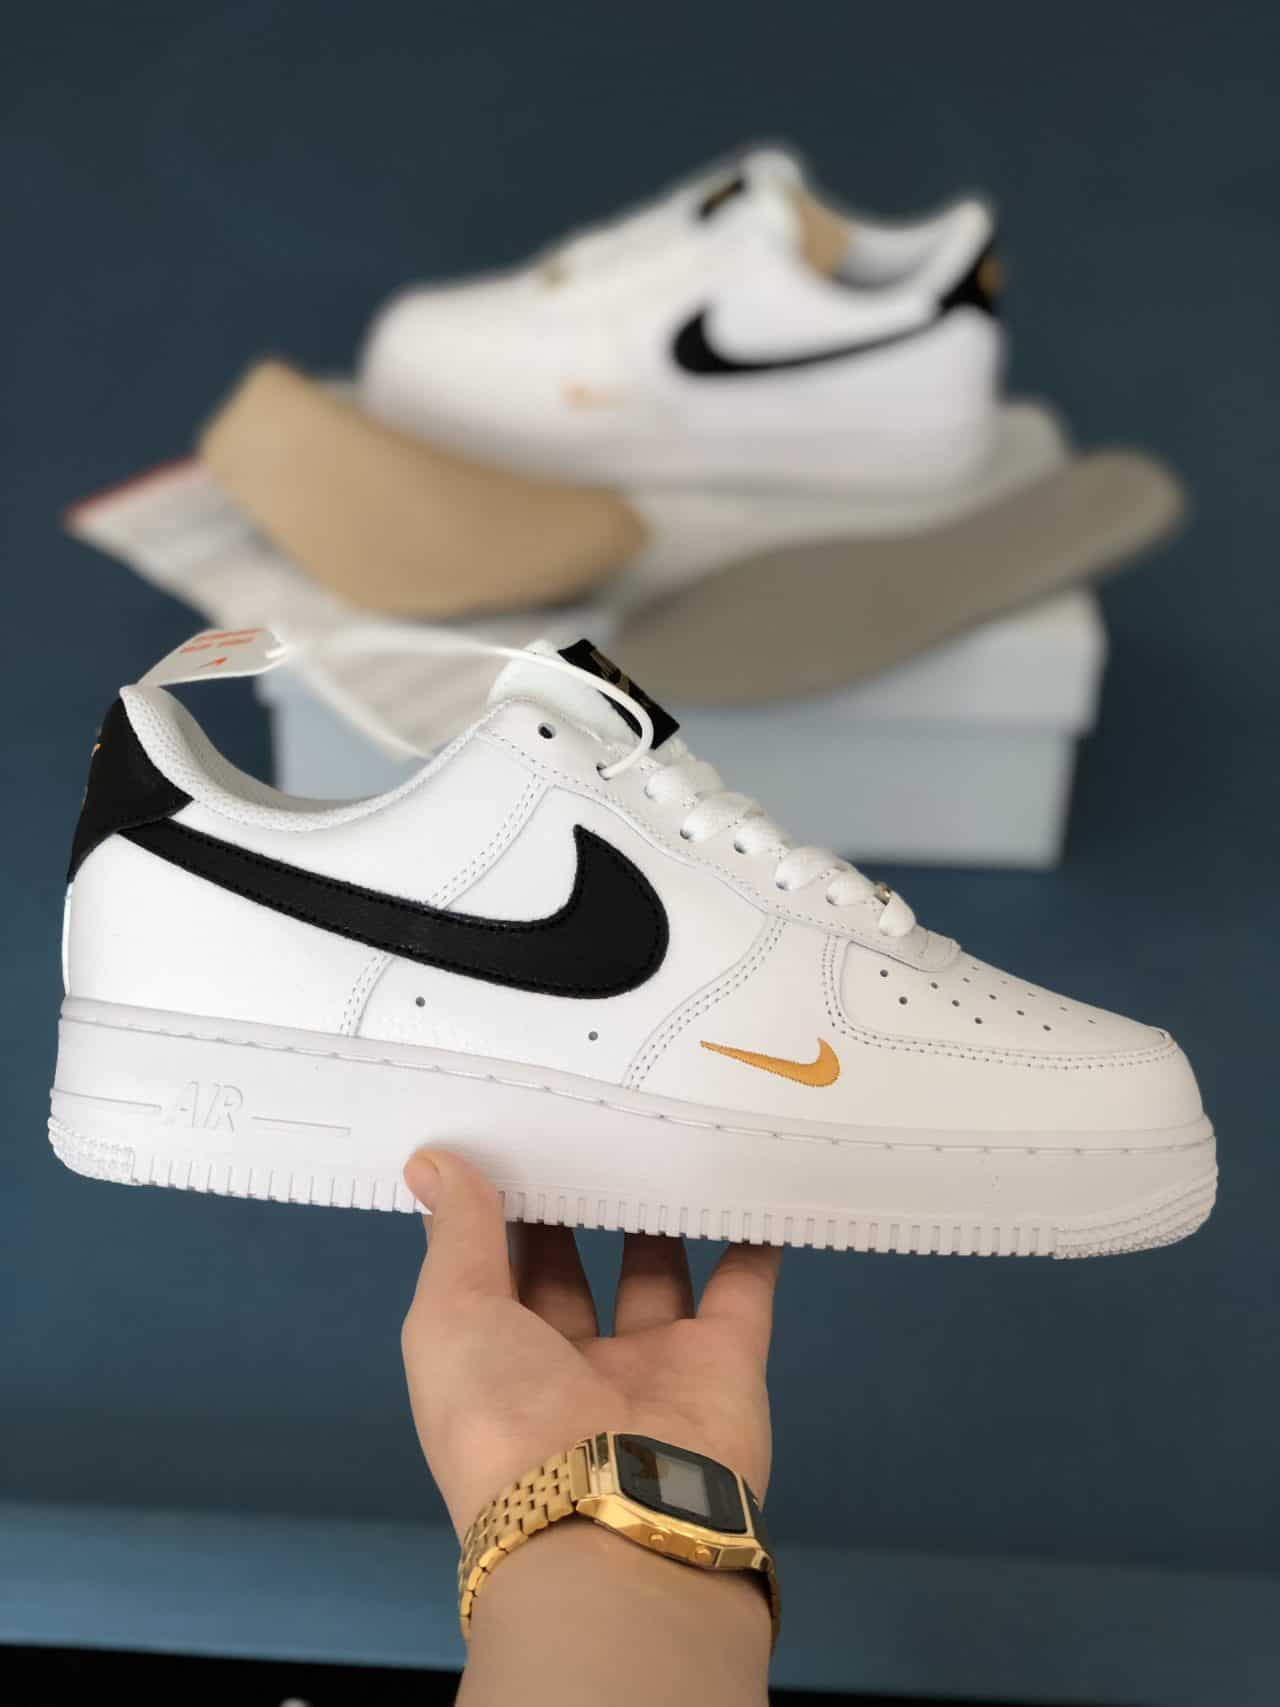 Nike Air Force 1 Low 07 Essential White Black Gold Rep 1:1